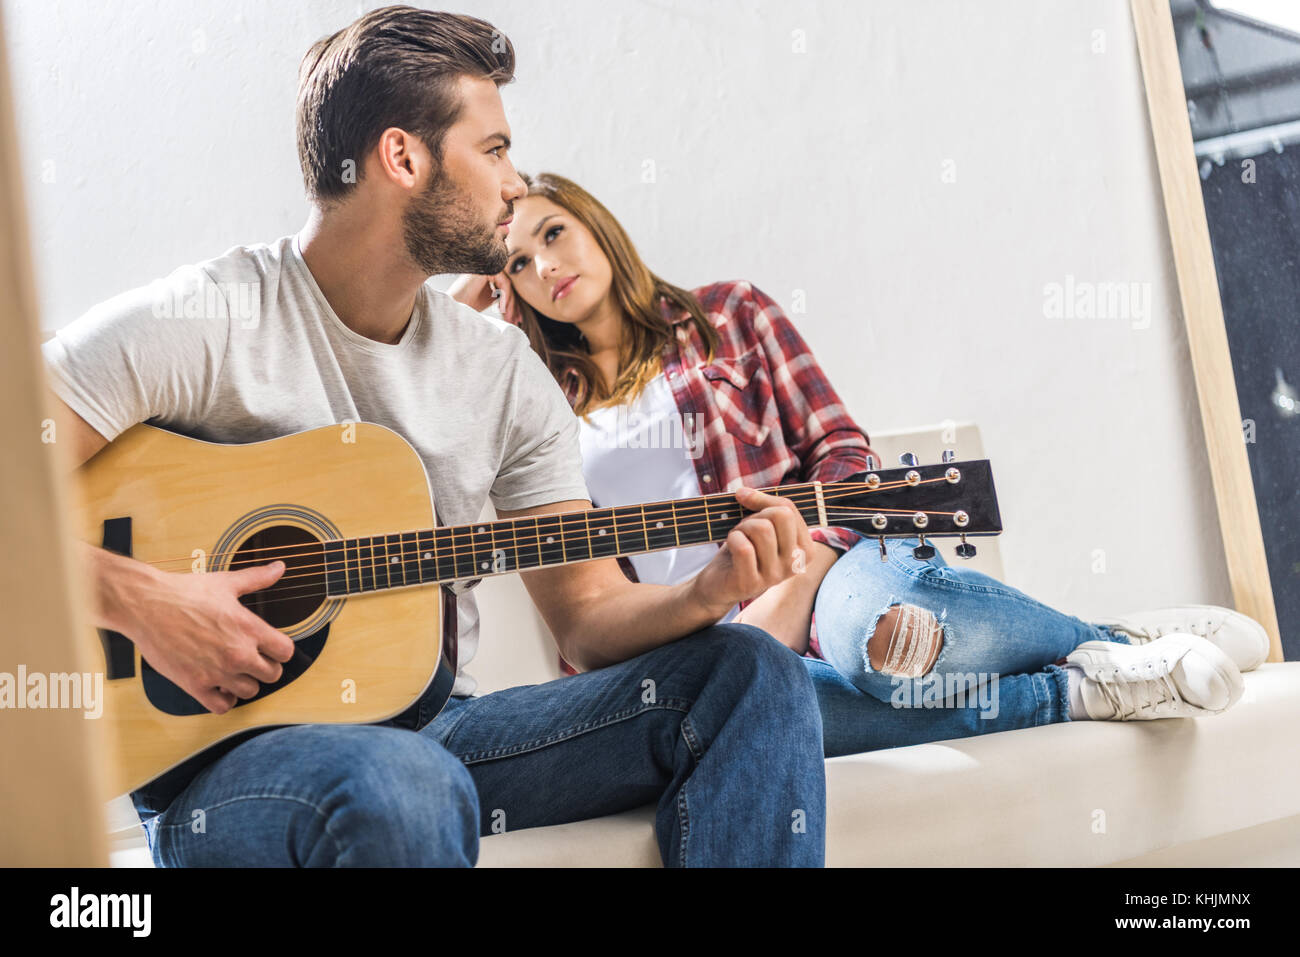 Couple on sofa with guitar Banque D'Images